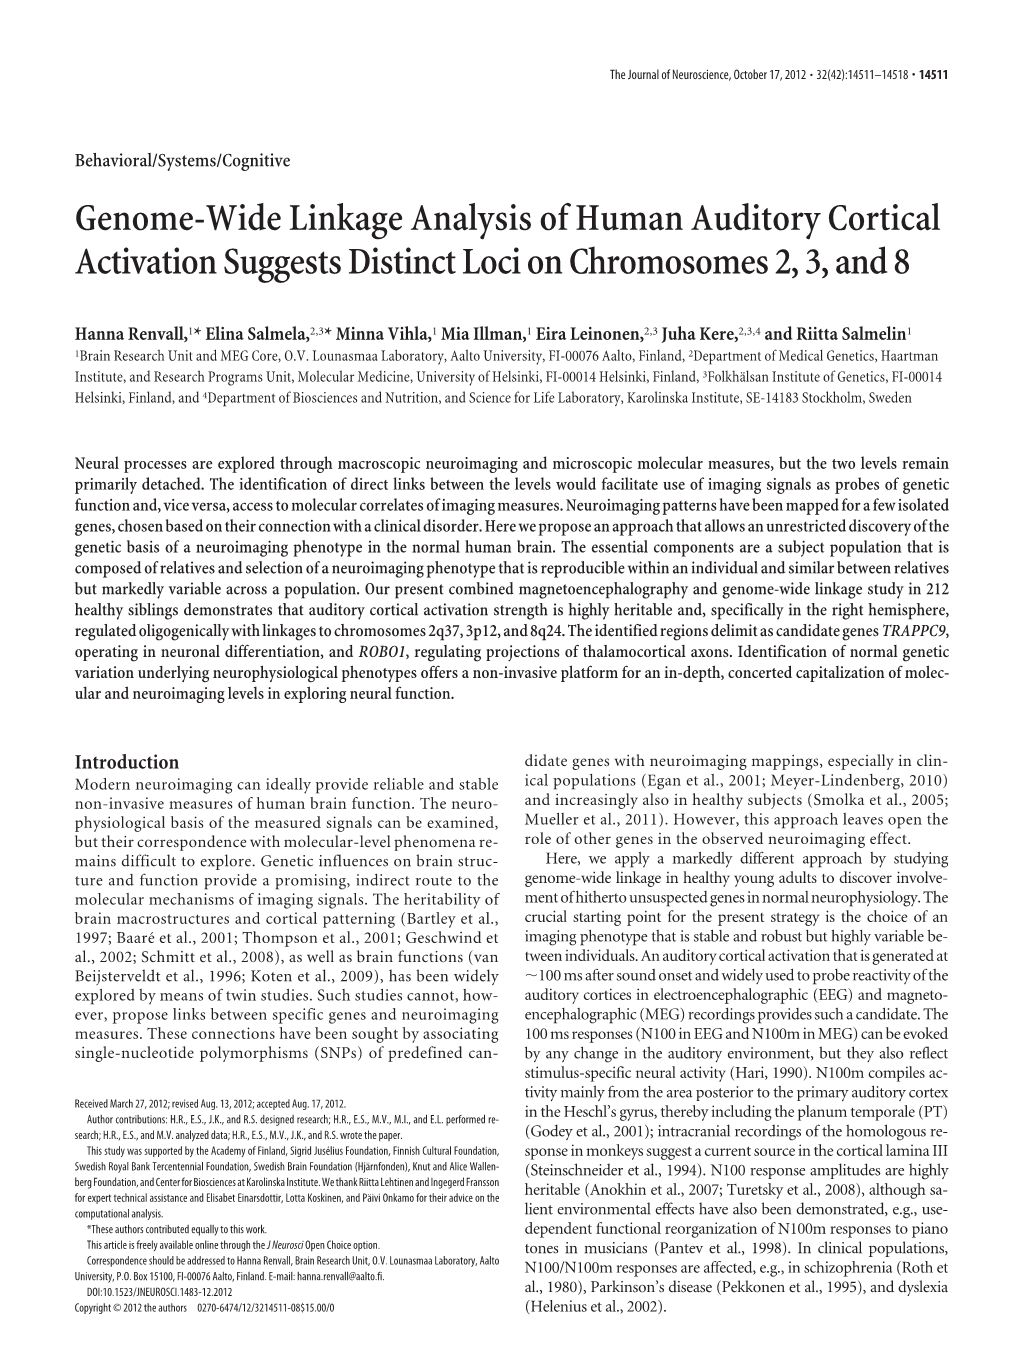 Genome-Wide Linkage Analysis of Human Auditory Cortical Activation Suggests Distinct Loci on Chromosomes 2, 3, and 8